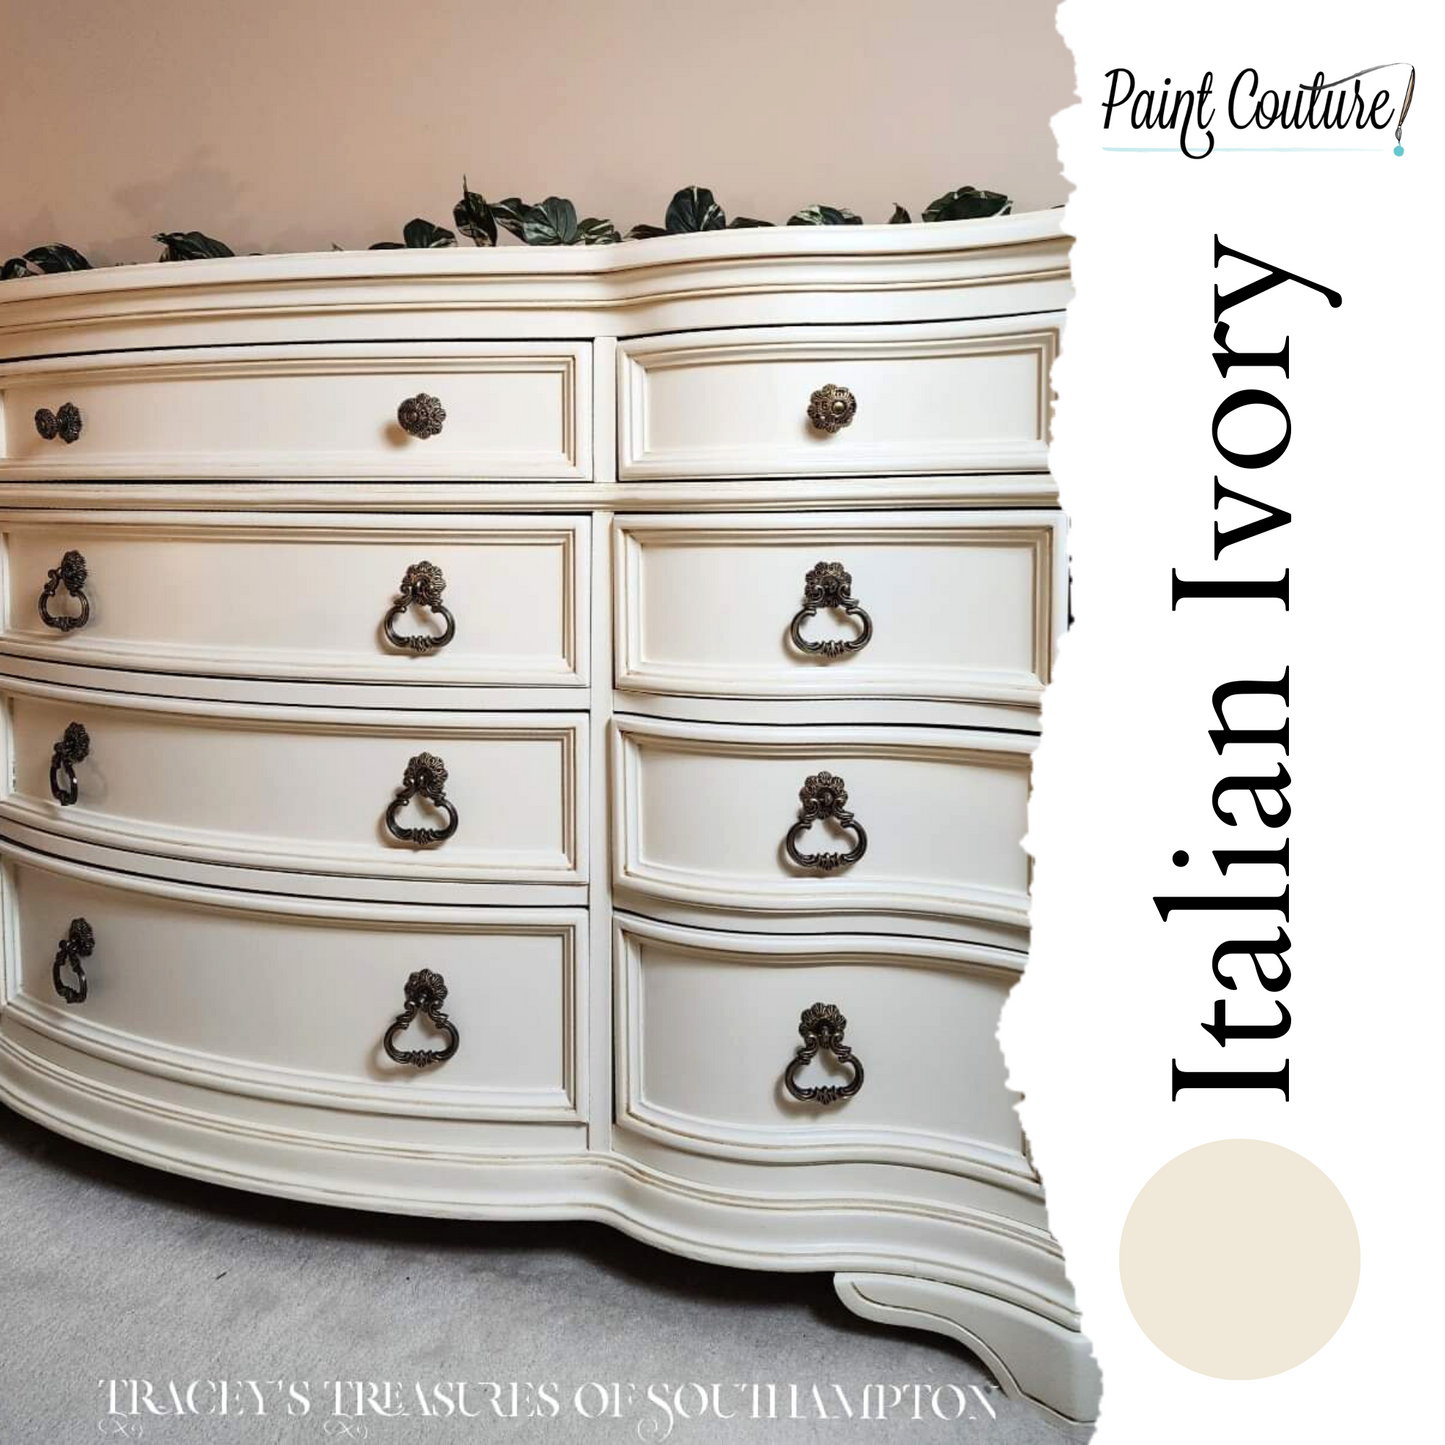 Paint Couture Italian Ivory - Acrylic Mineral Paint with a Flat Finish!